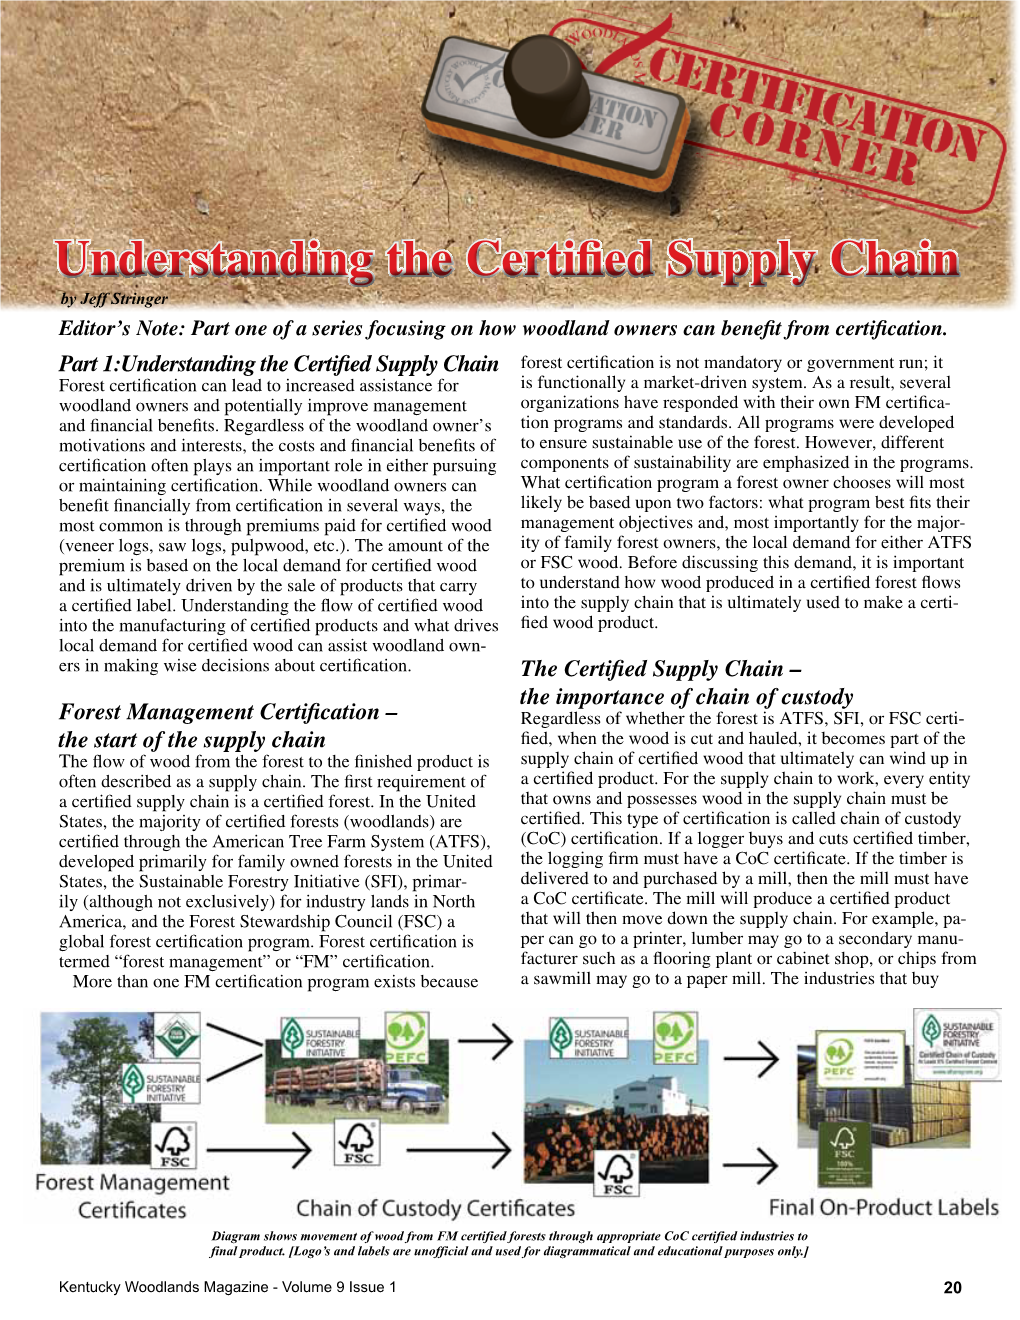 Understanding the Certified Supply Chain by Jeff Stringer Editor’S Note: Part One of a Series Focusing on How Woodland Owners Can Benefit from Certification